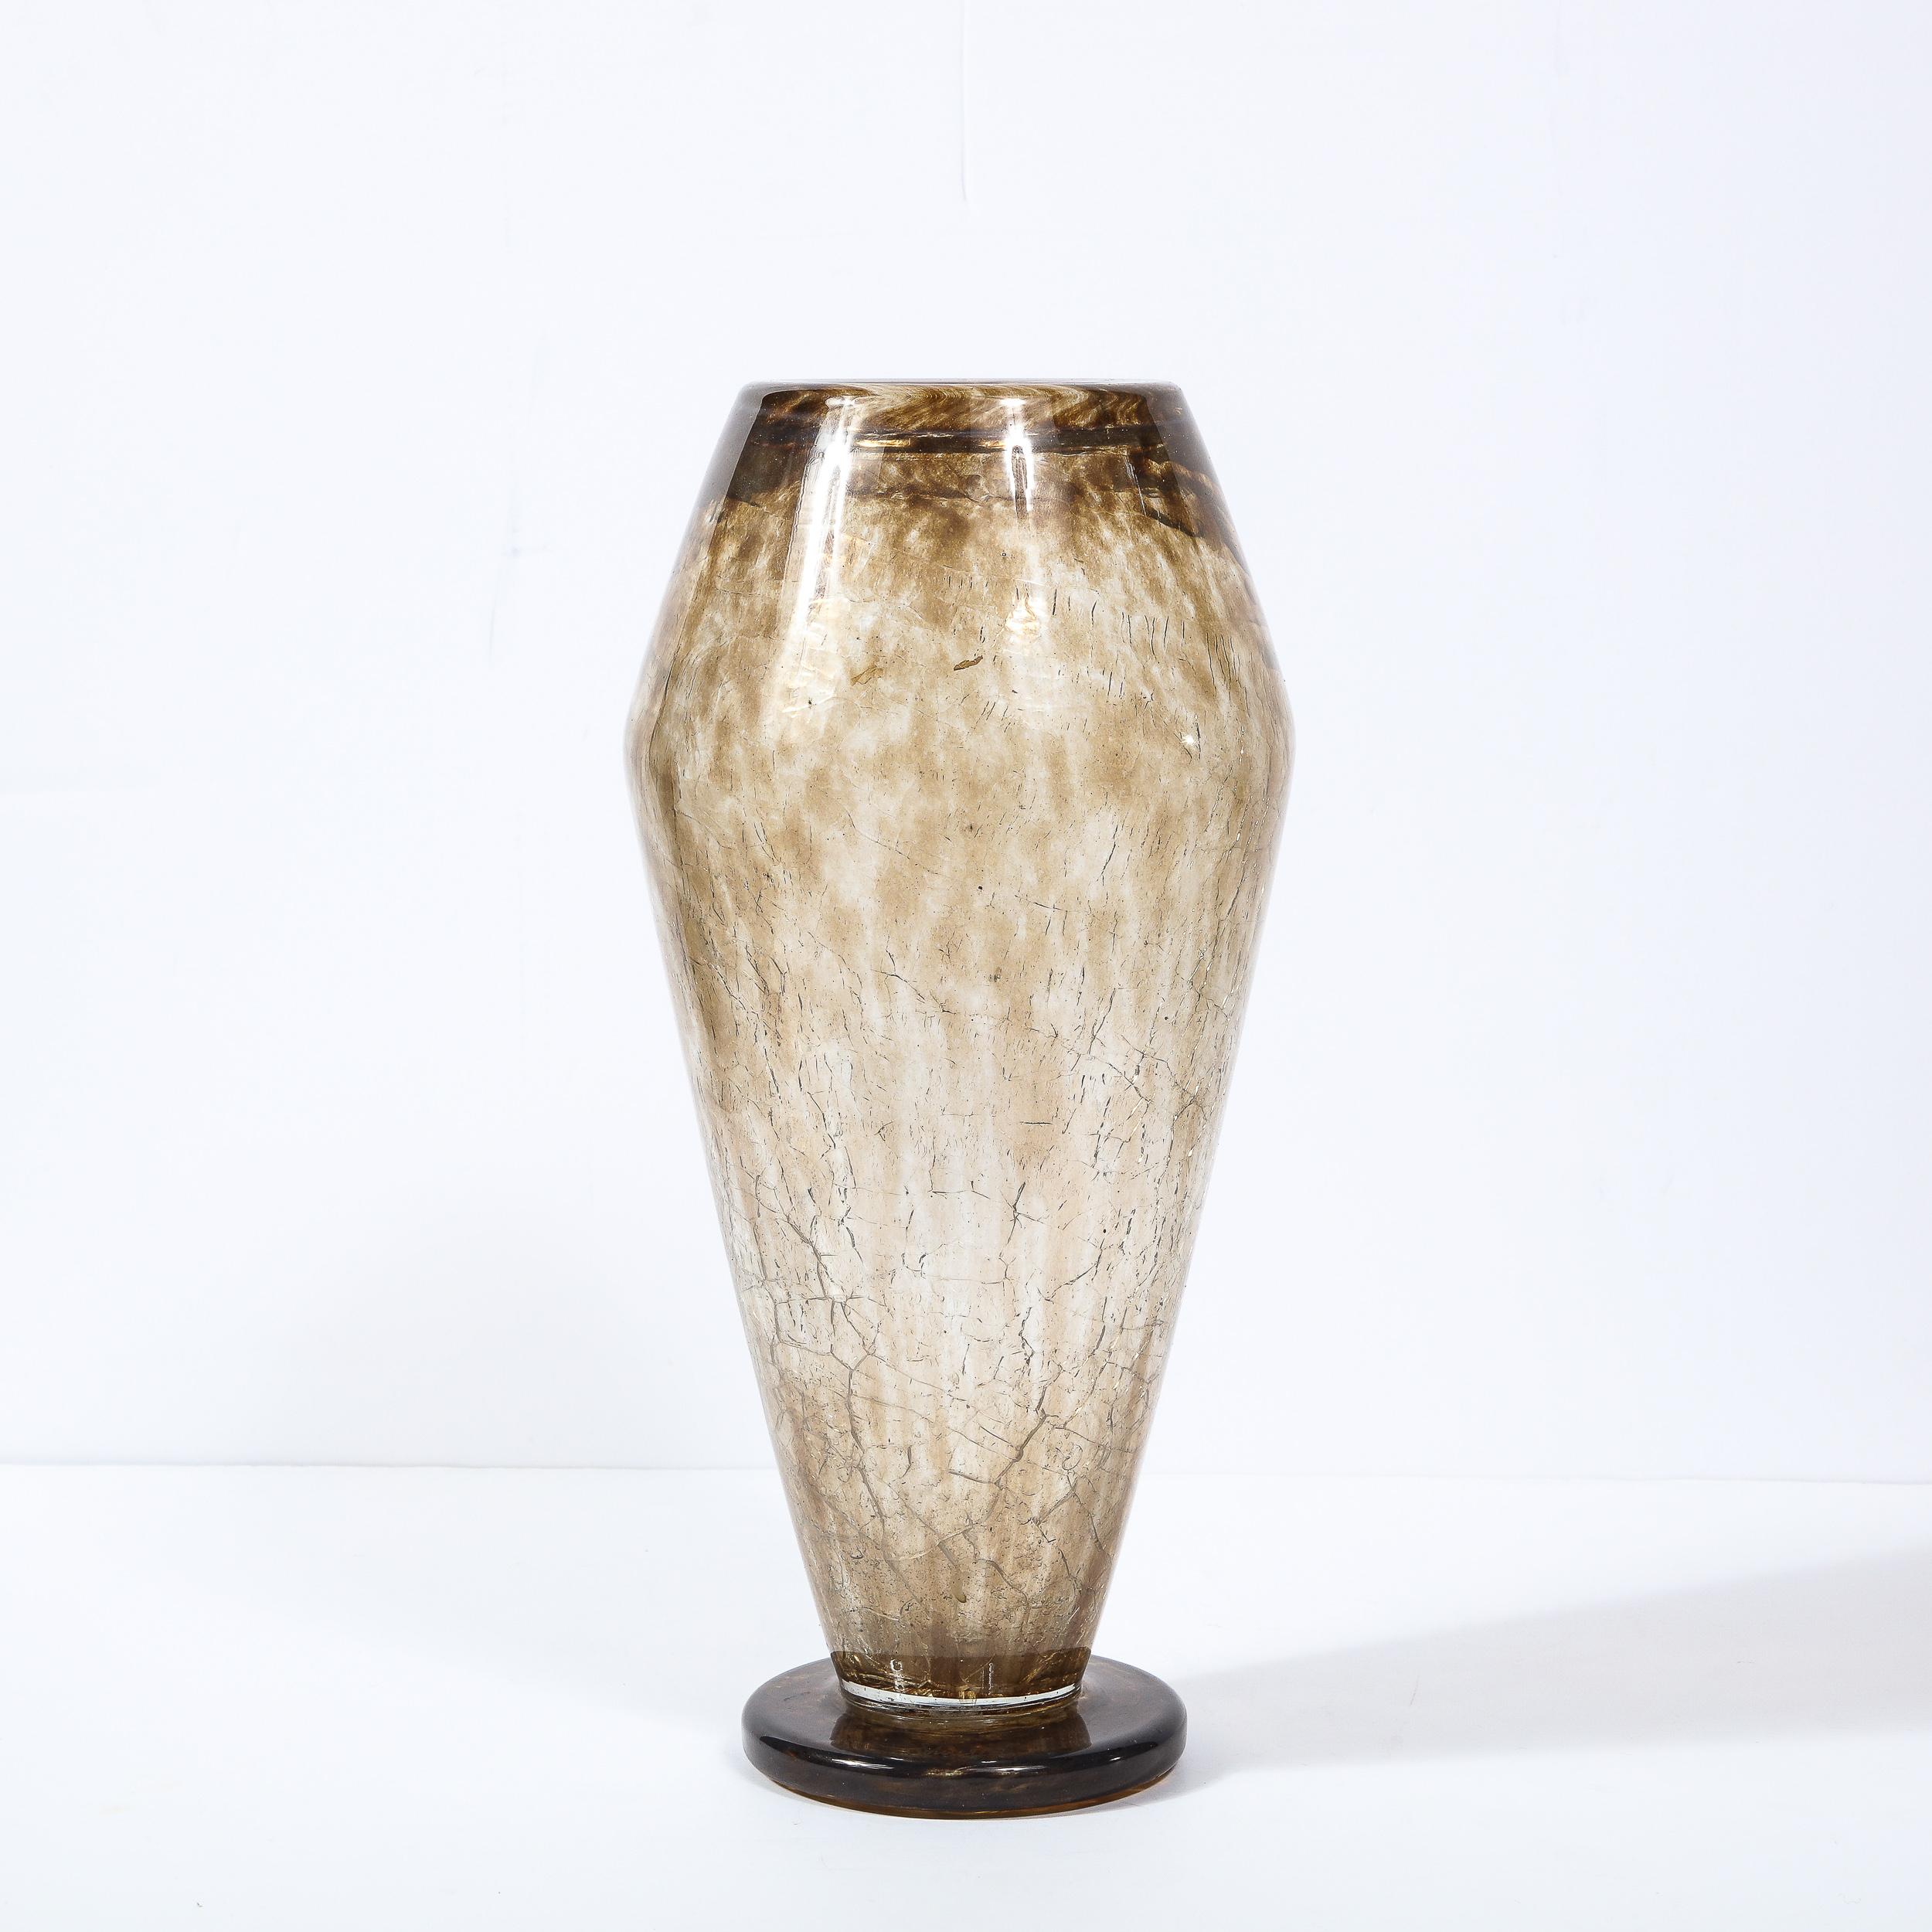 This stunning Art Deco vase (signed Schneider) was realized in the studio of the esteemed glass makers Ernest and Charles Schneider circa 1925. The Schneider Brothers were some of the most respected and masterful glass artists in France during this